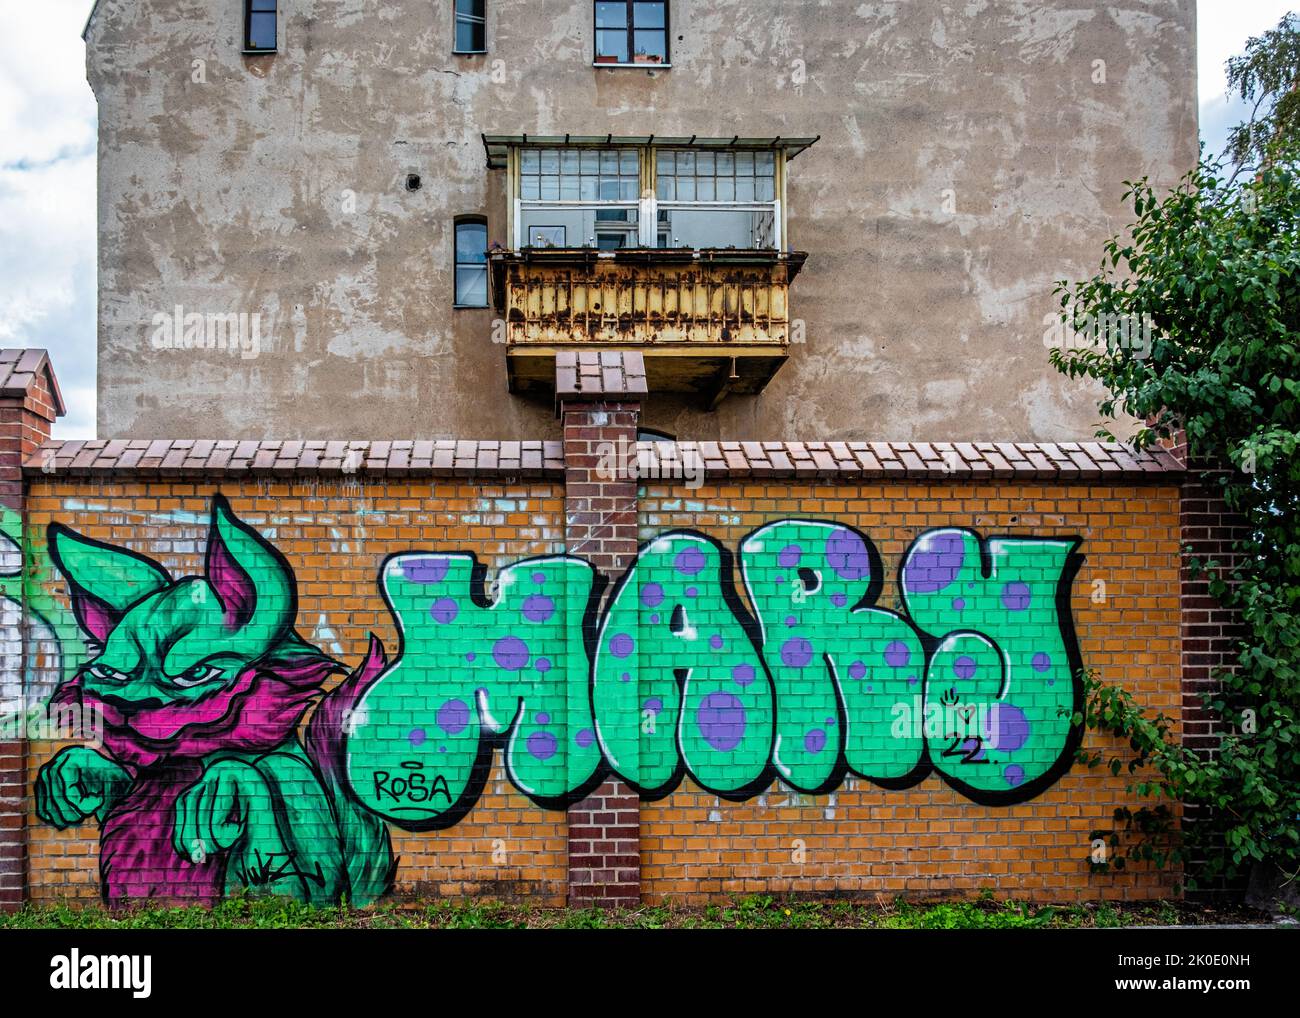 Wall with urban art & balcony on Firewall of building, Ollenhauerstrasse, Reinickendorf, Berlin, Germany Stock Photo